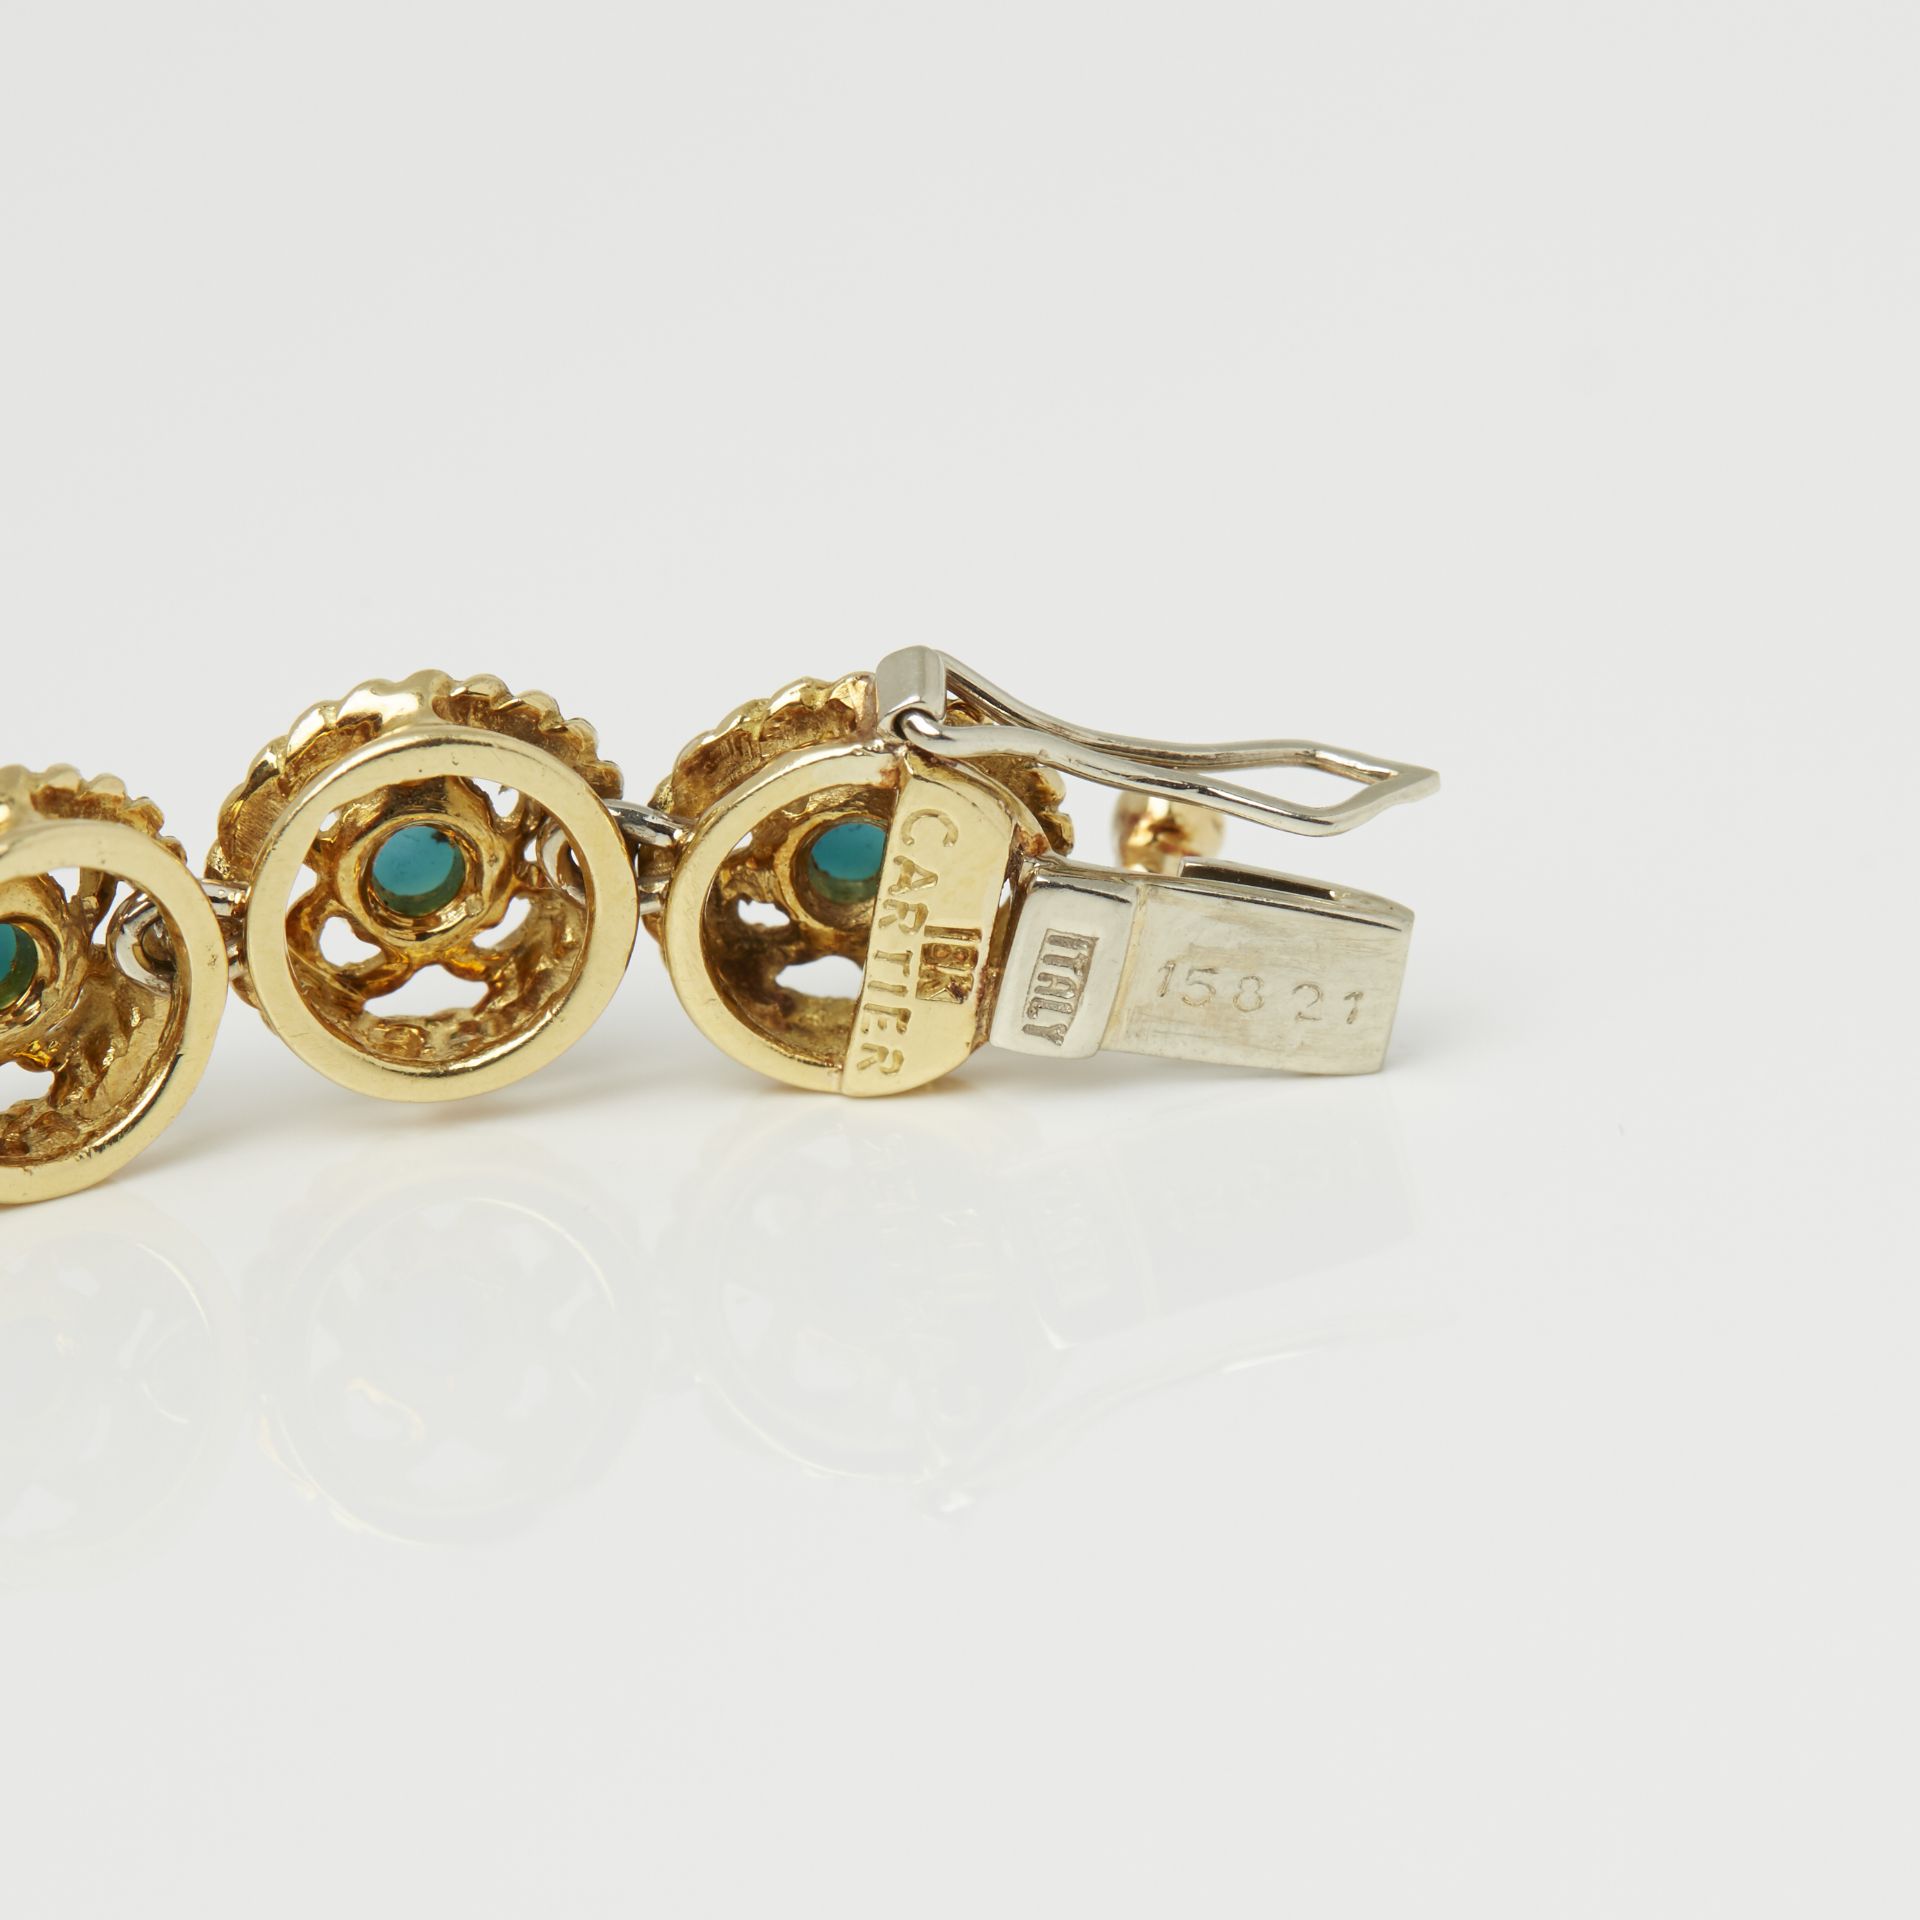 Cartier 18k Yellow Gold Turquoise Bracelet - Image 12 of 12